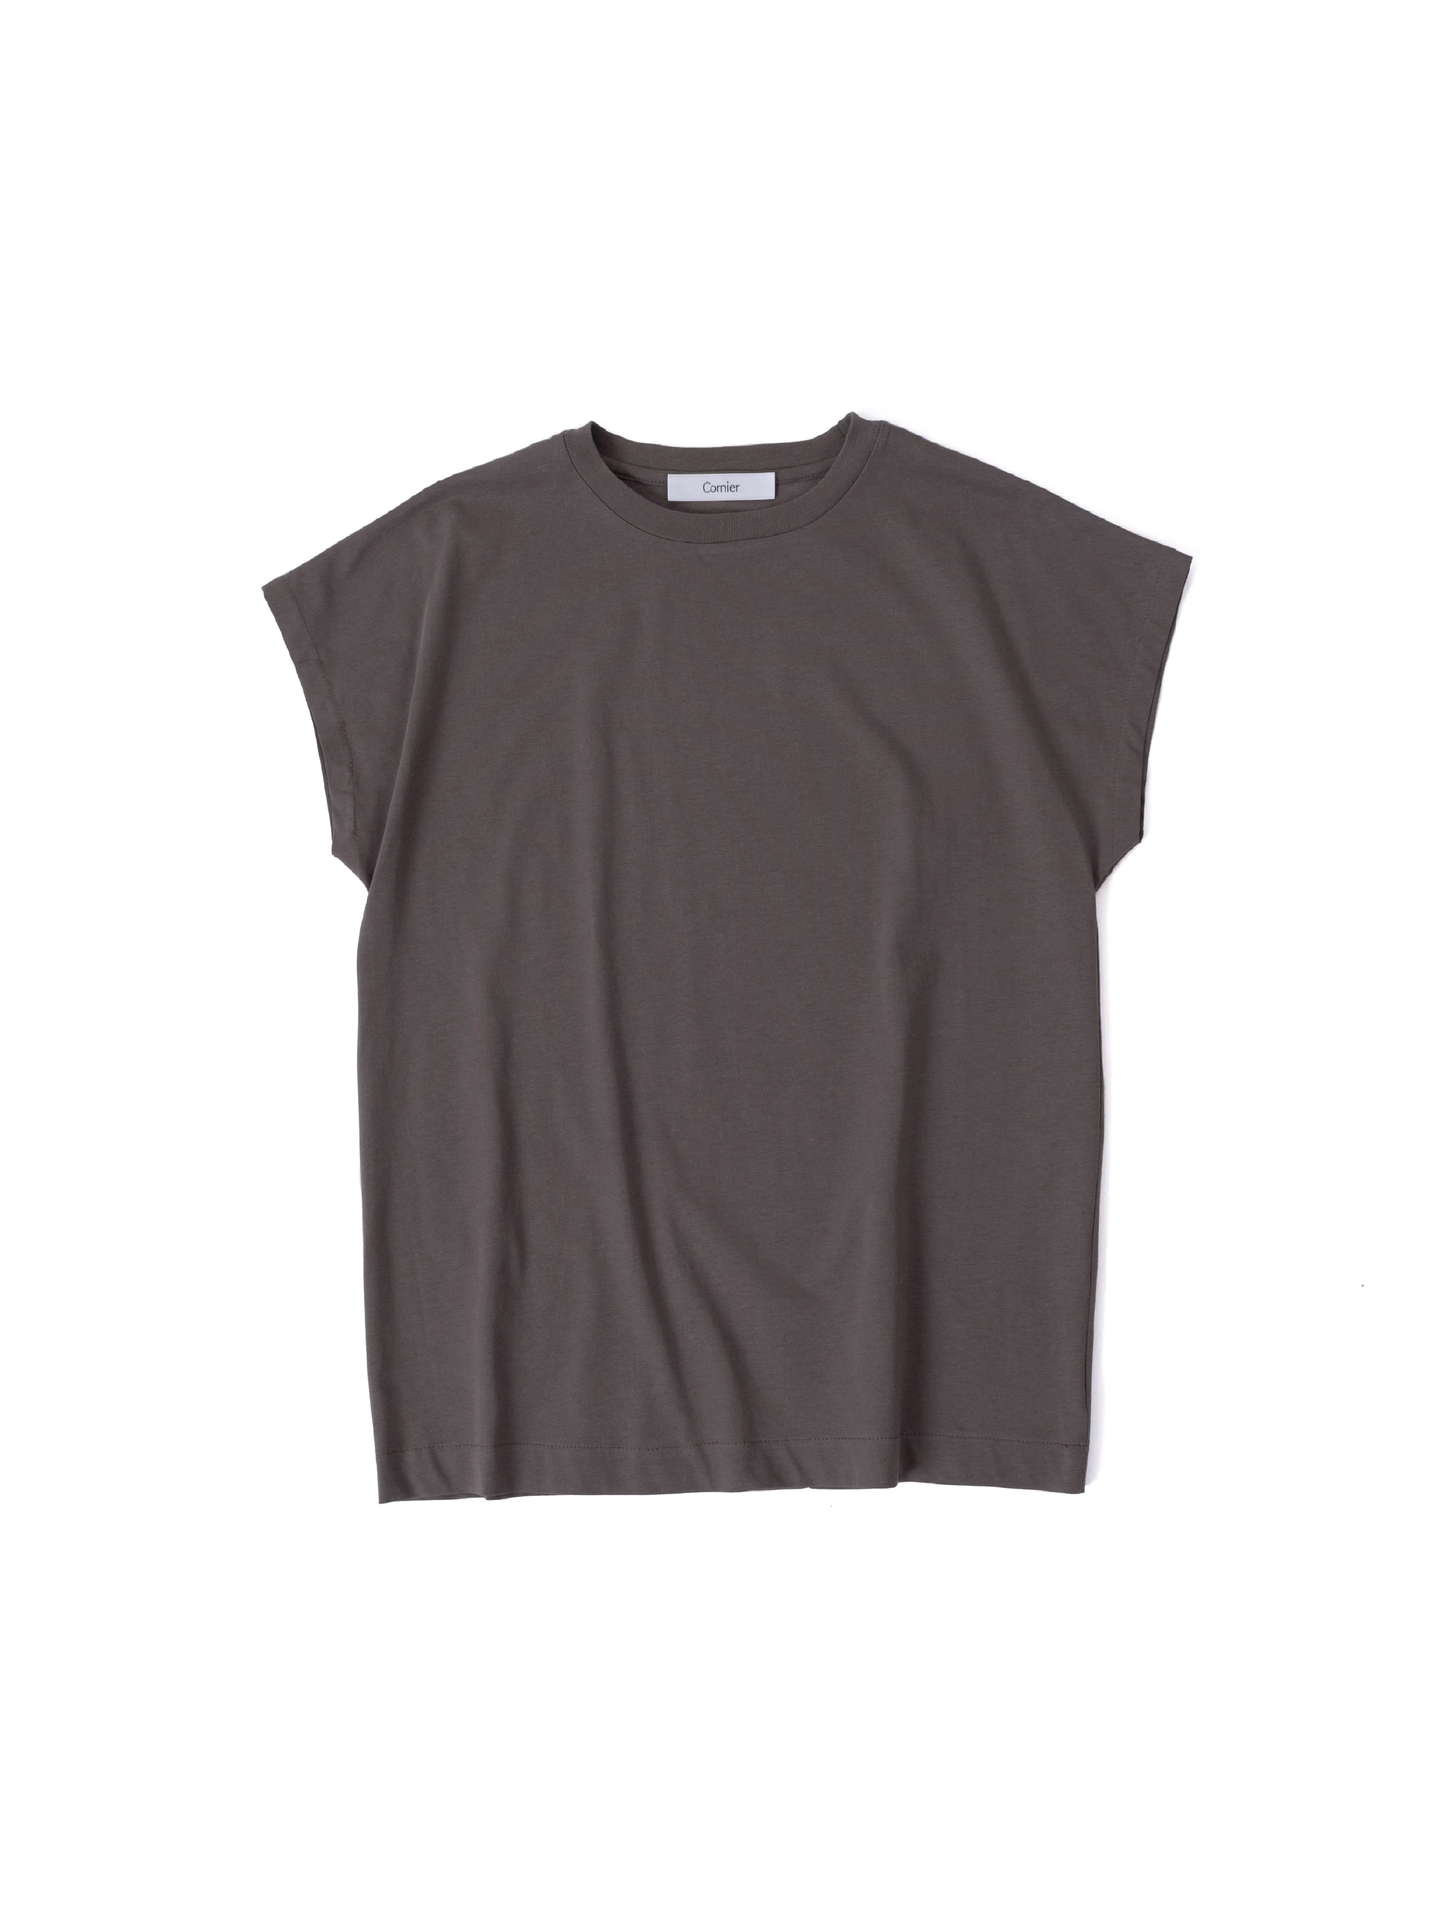 CLEAR JERSEY FRENCH SLEEVE T-SHIRTS｜GREIGE